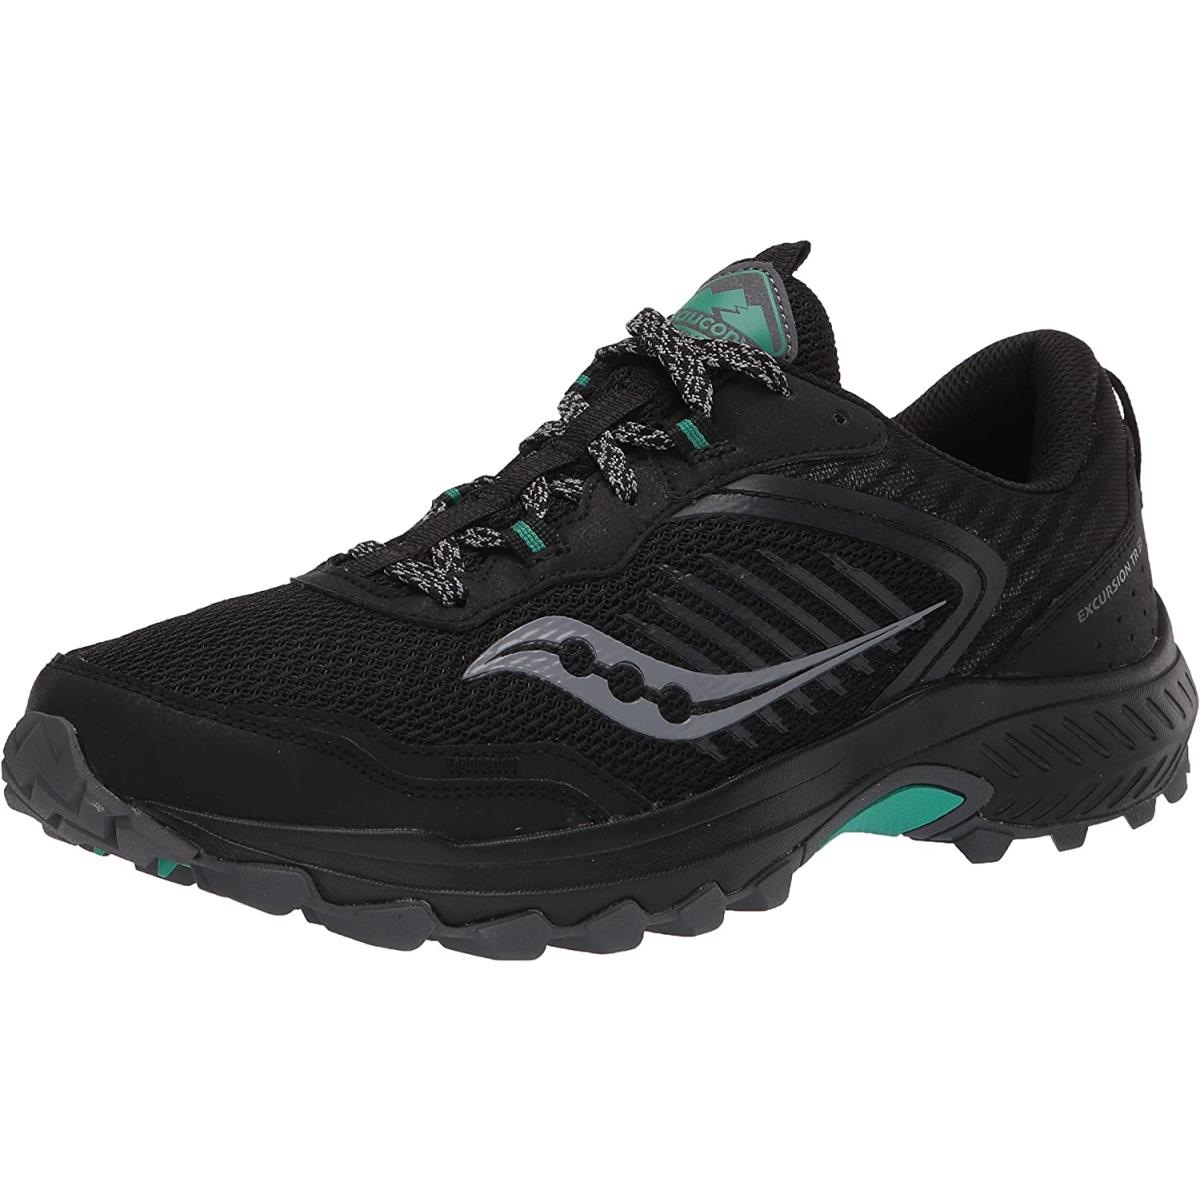 Saucony Womens Excursion Tr15 Trail Running Shoe Black/Jade